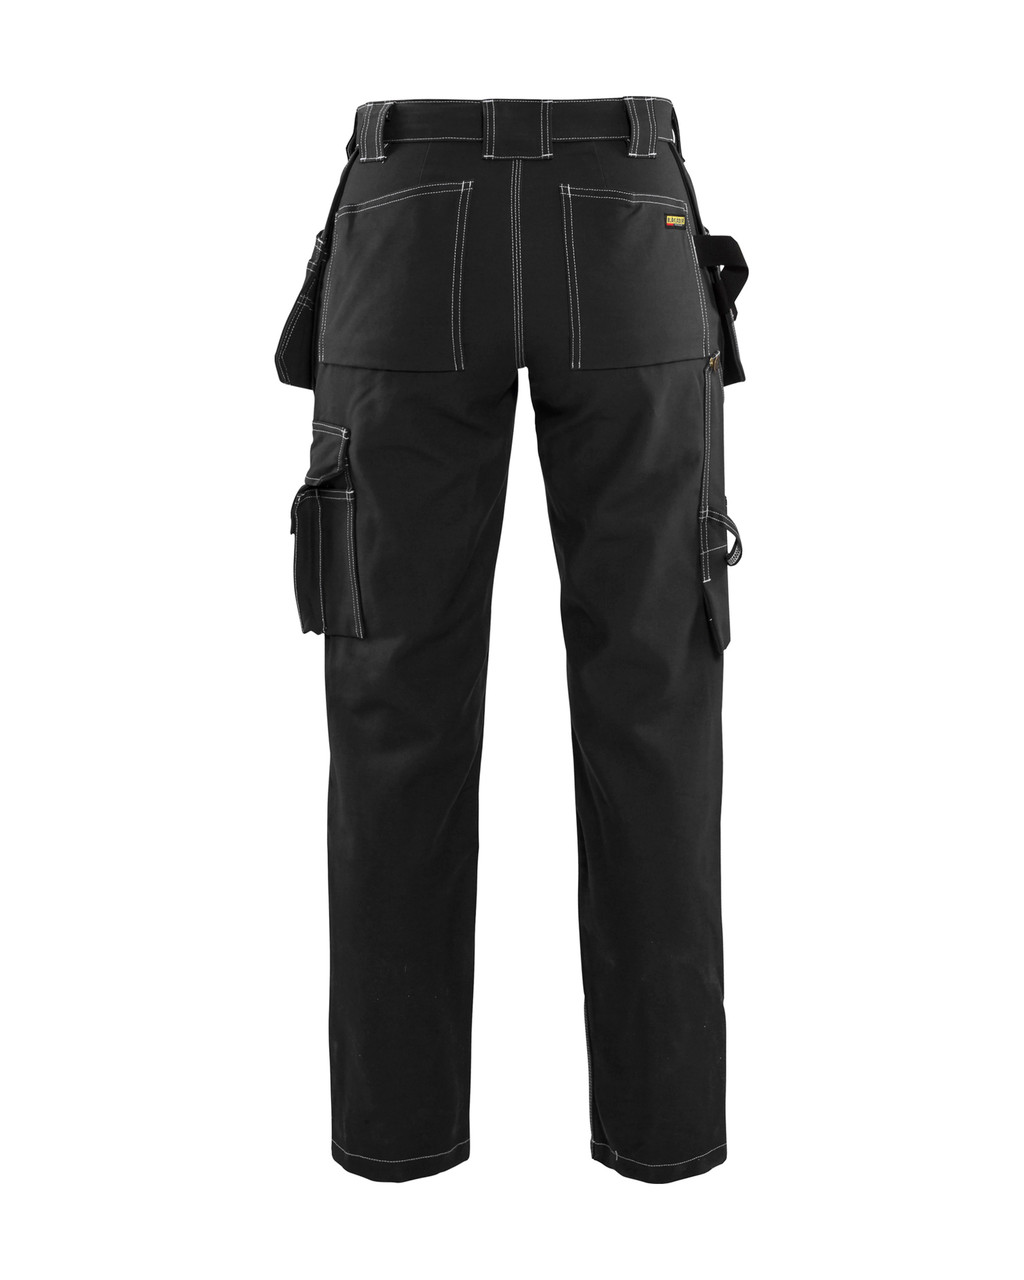 Craftsman Hardware supplies BLAKLADER workwear range including Trousers with Holster Pockets for the Carpentry to support Women in Construction in Sydney